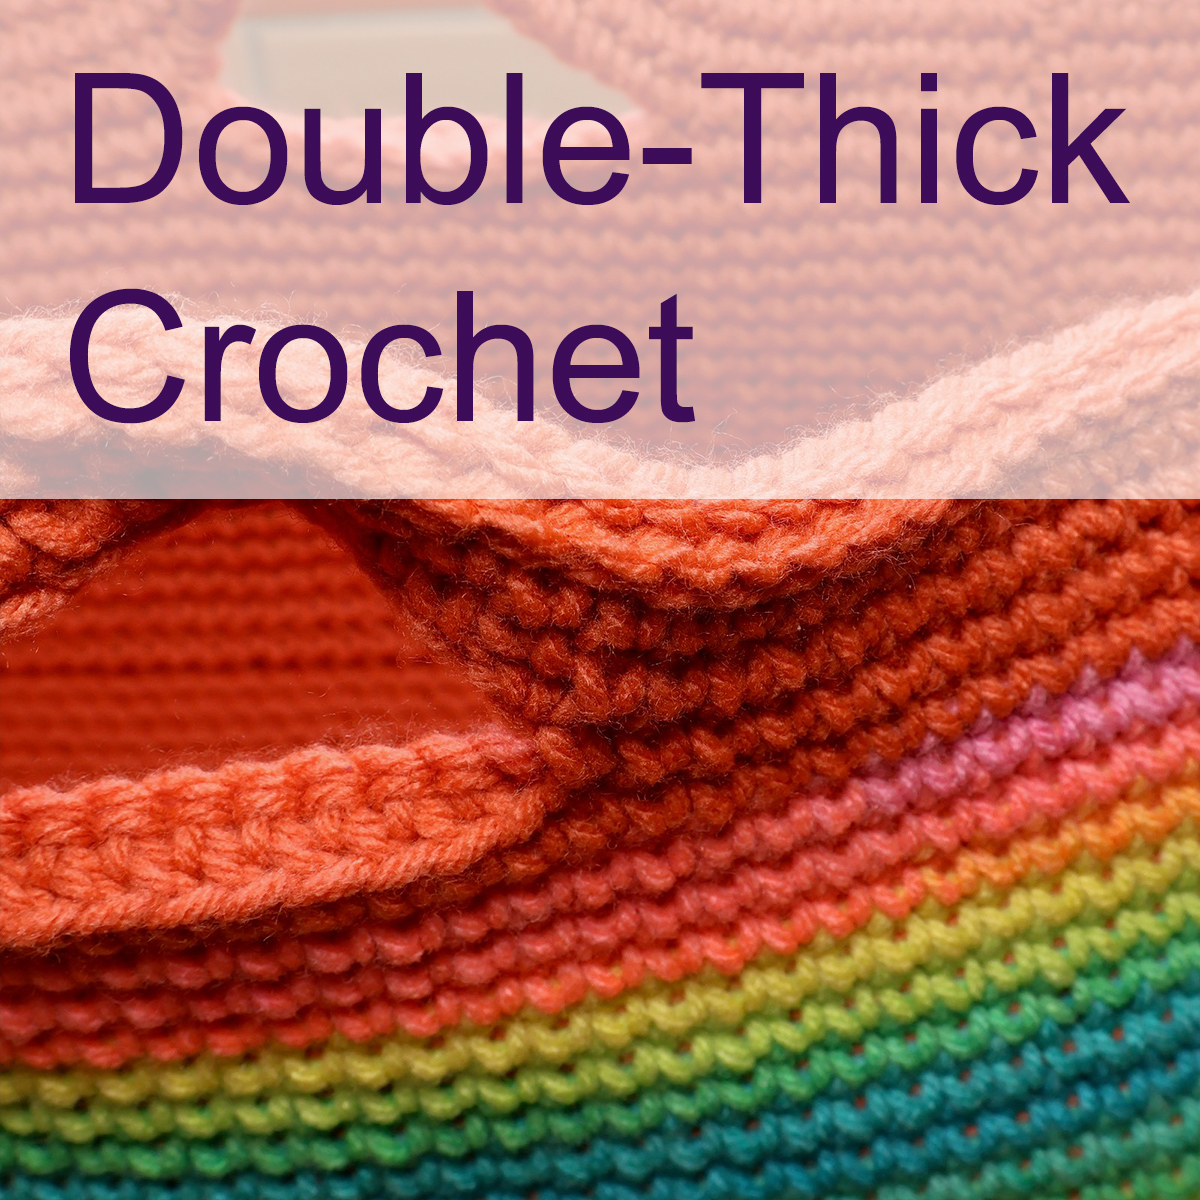 Closeup of a double-thick crocheted market bag in rainbow hues. Caption: Double-Thick Crochet